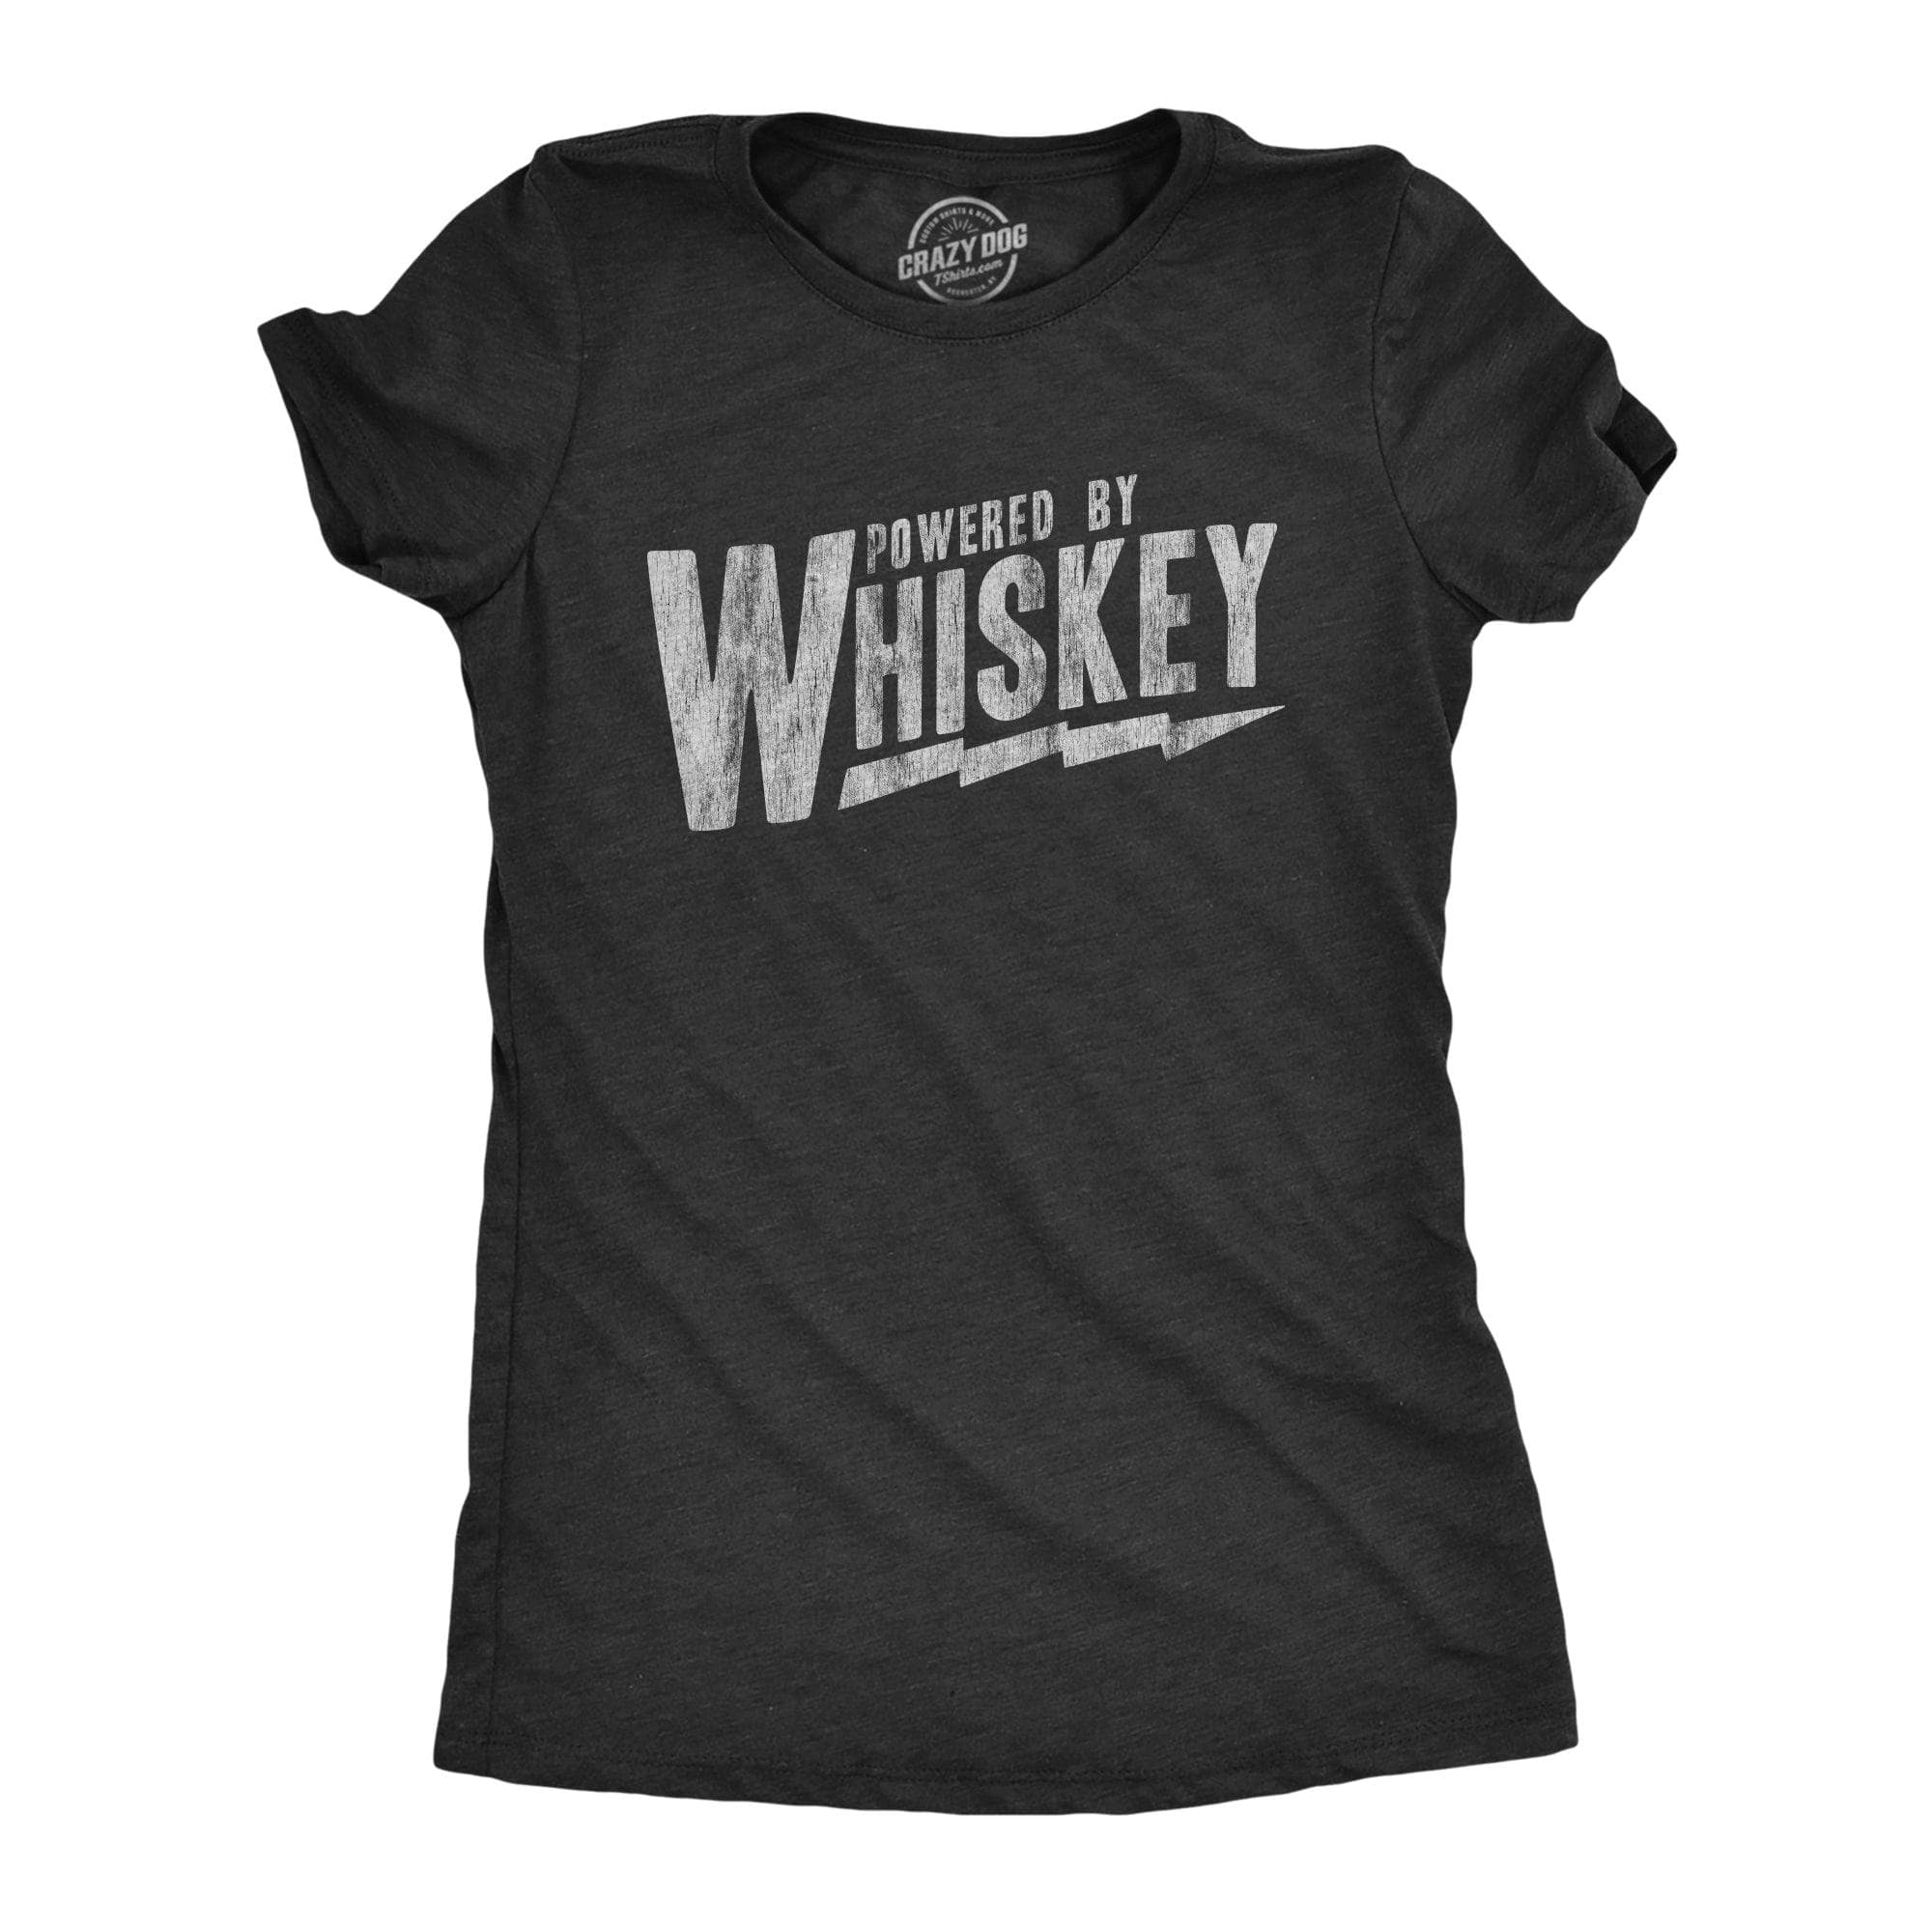 Powered By Whiskey Women's Tshirt  -  Crazy Dog T-Shirts